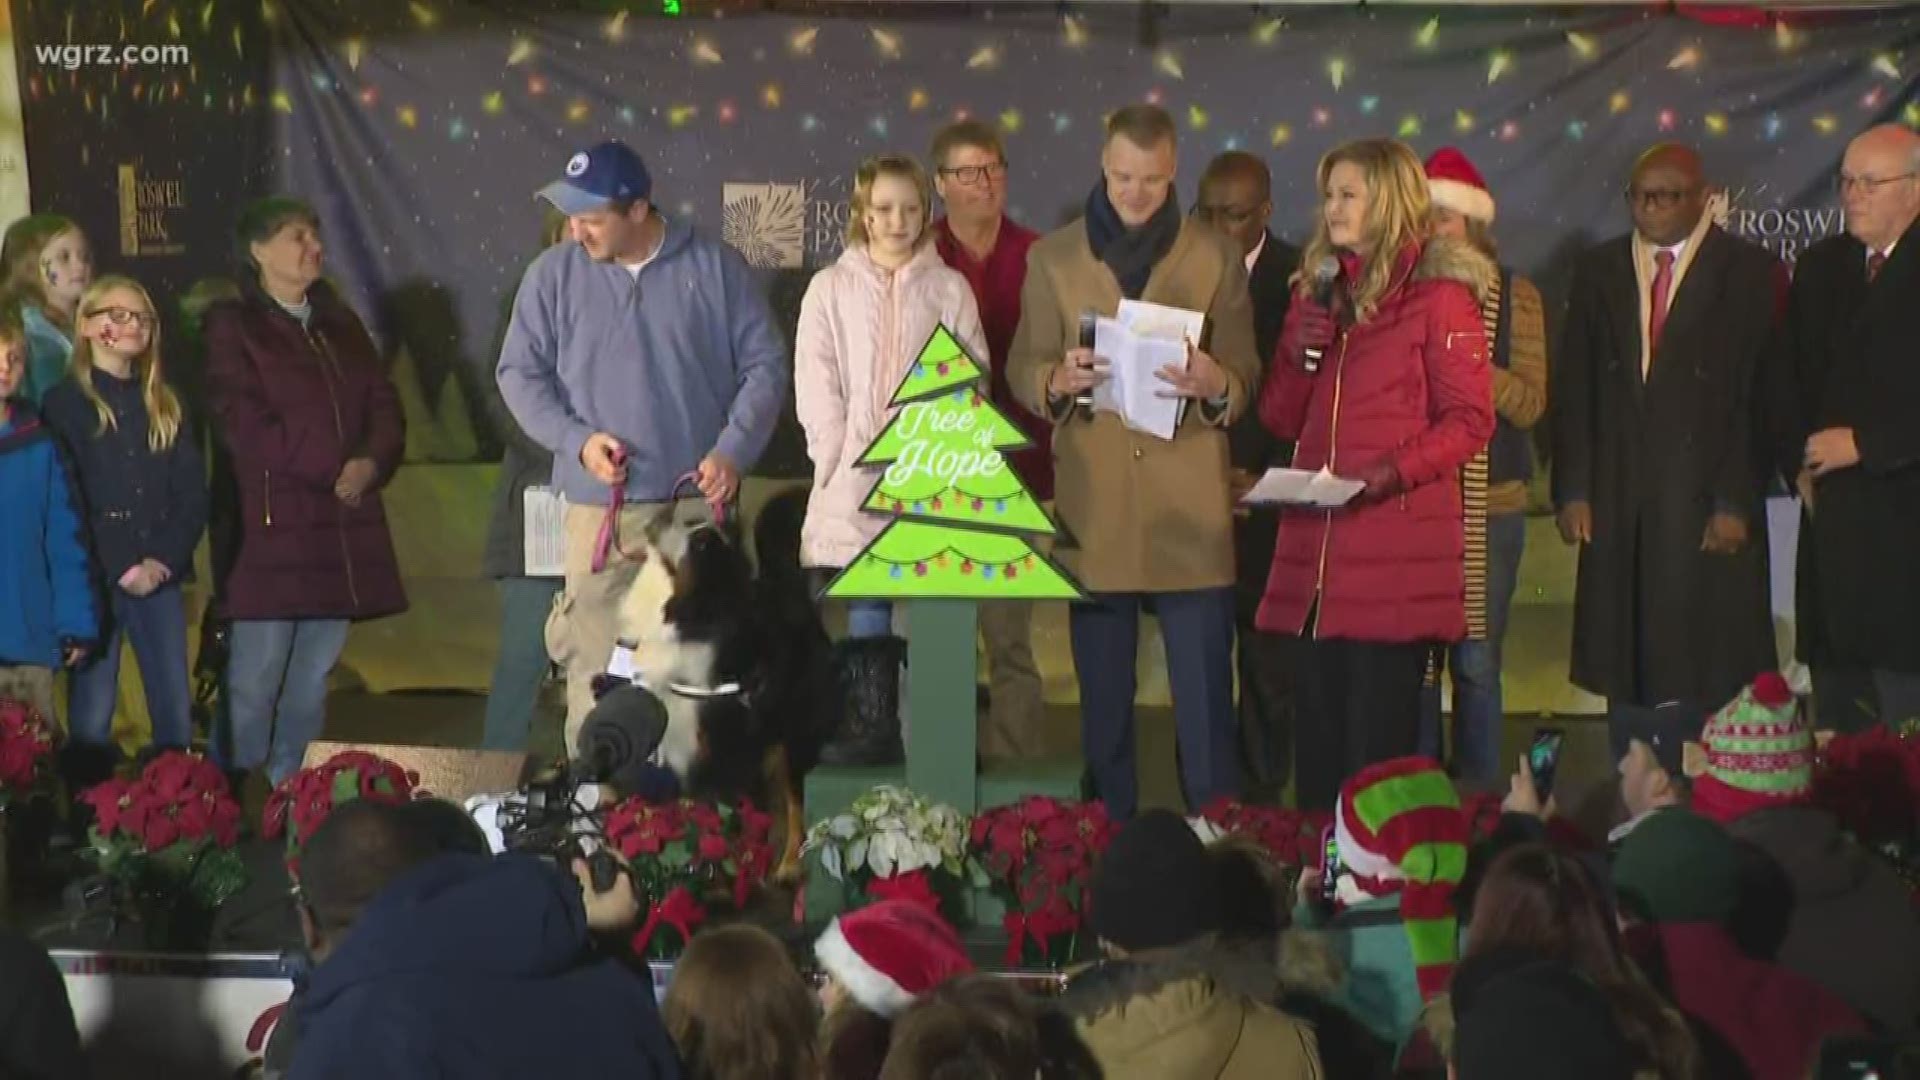 The team from Roswell selects a pediatric cancer patient to do the honors and flip the switch to light the tree. Tonight, Melissa Holmes lights the tree this year.